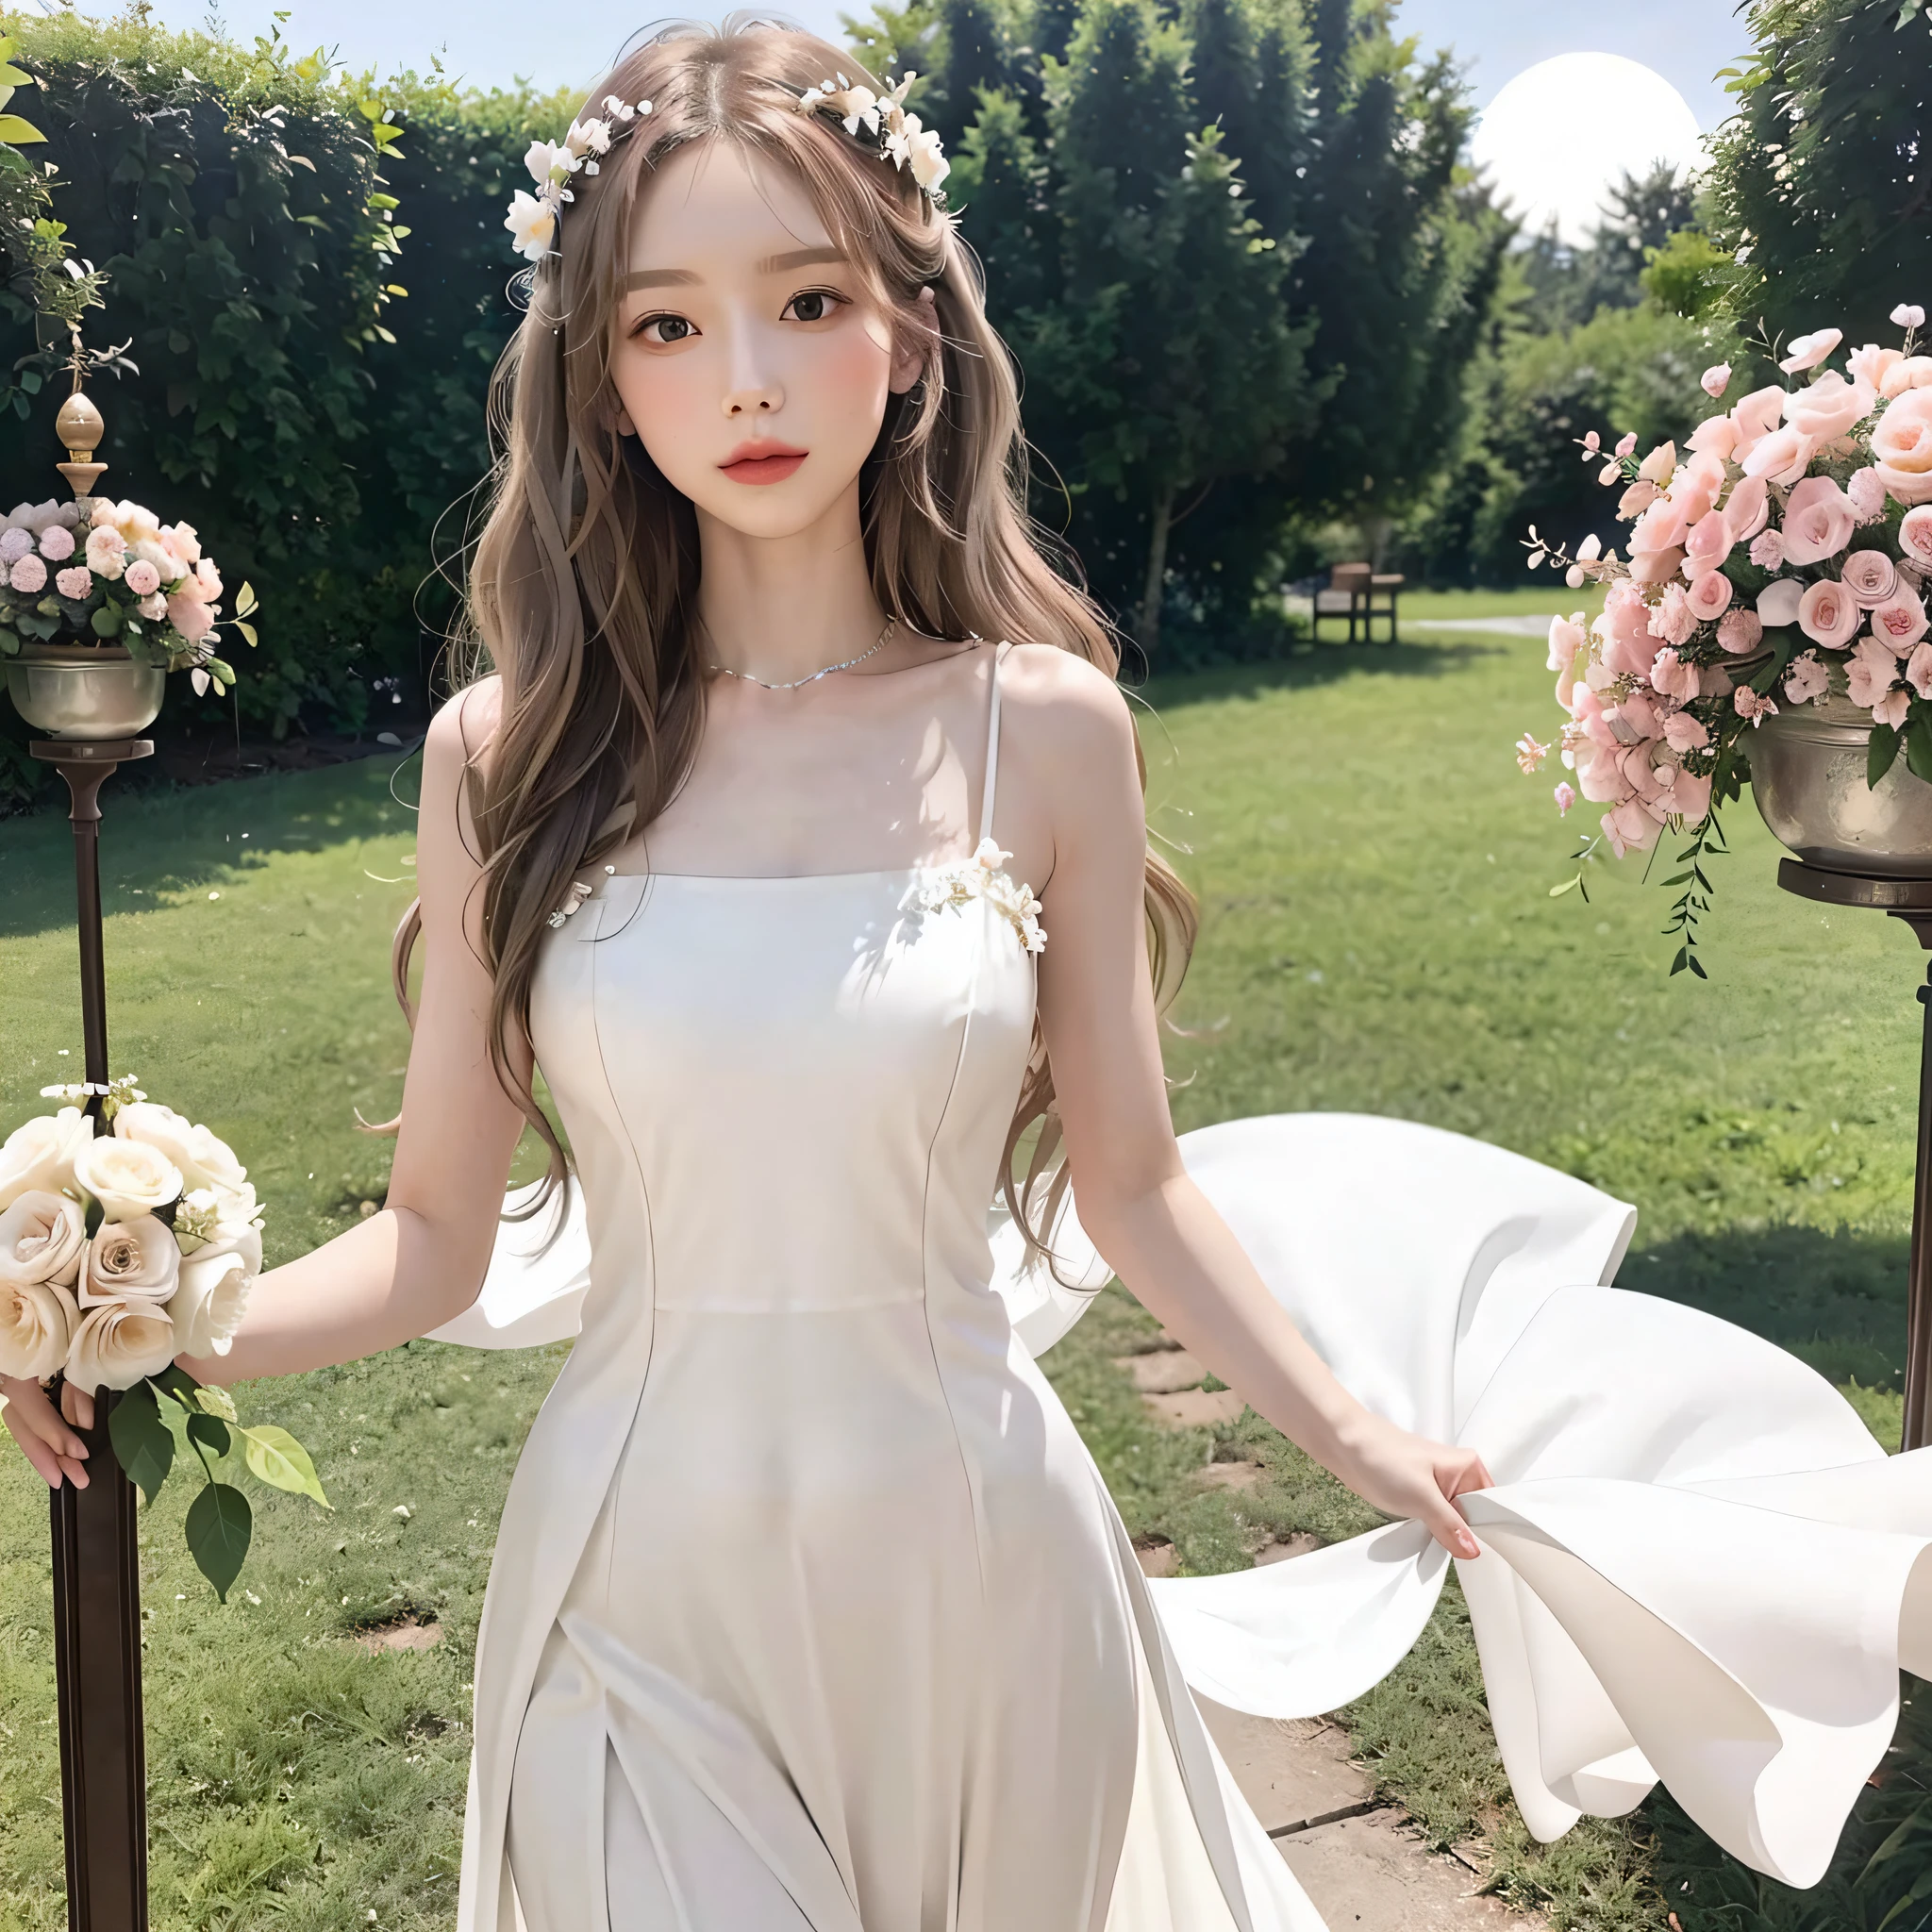 (An elegant and beautiful) woman with (long and delicate wavy hair) in a (form-fitting) white (sun) dress stands tall. She wears a (dainty) circlet made from (delicate) pink flowers that (adds a touch of nature) to the (overall look).